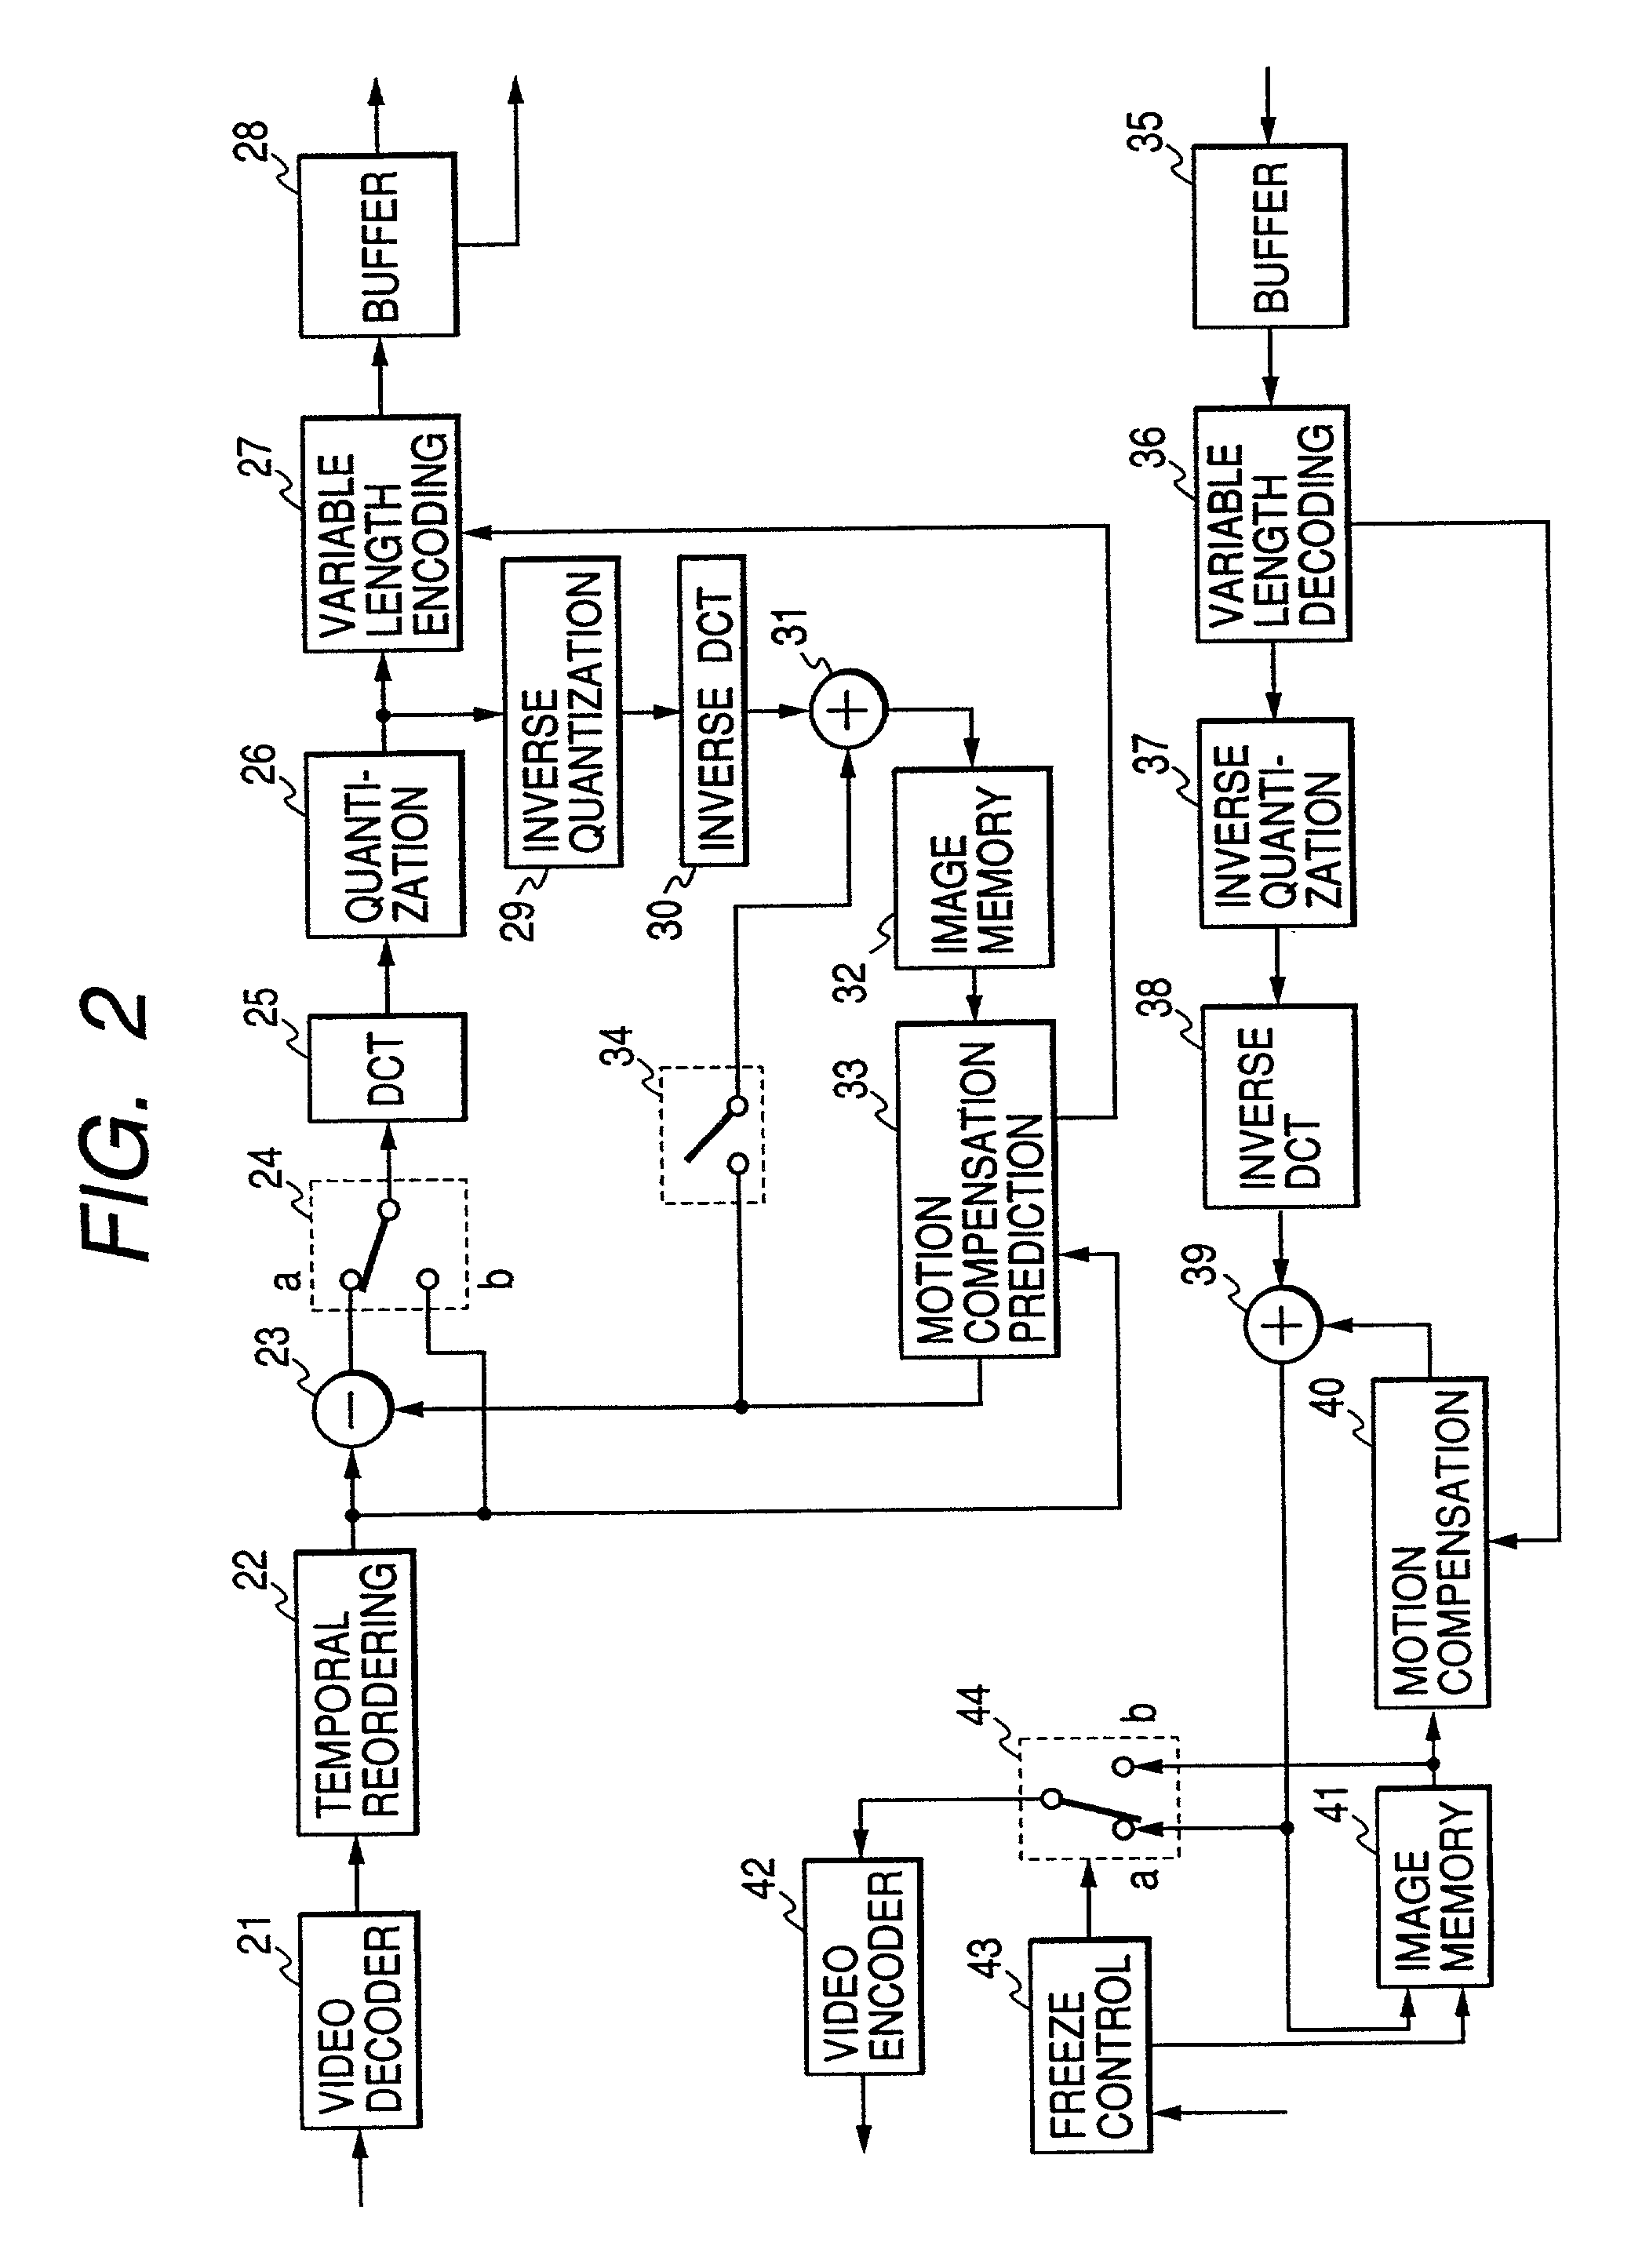 Method and apparatus for recording and playing back monitored video data